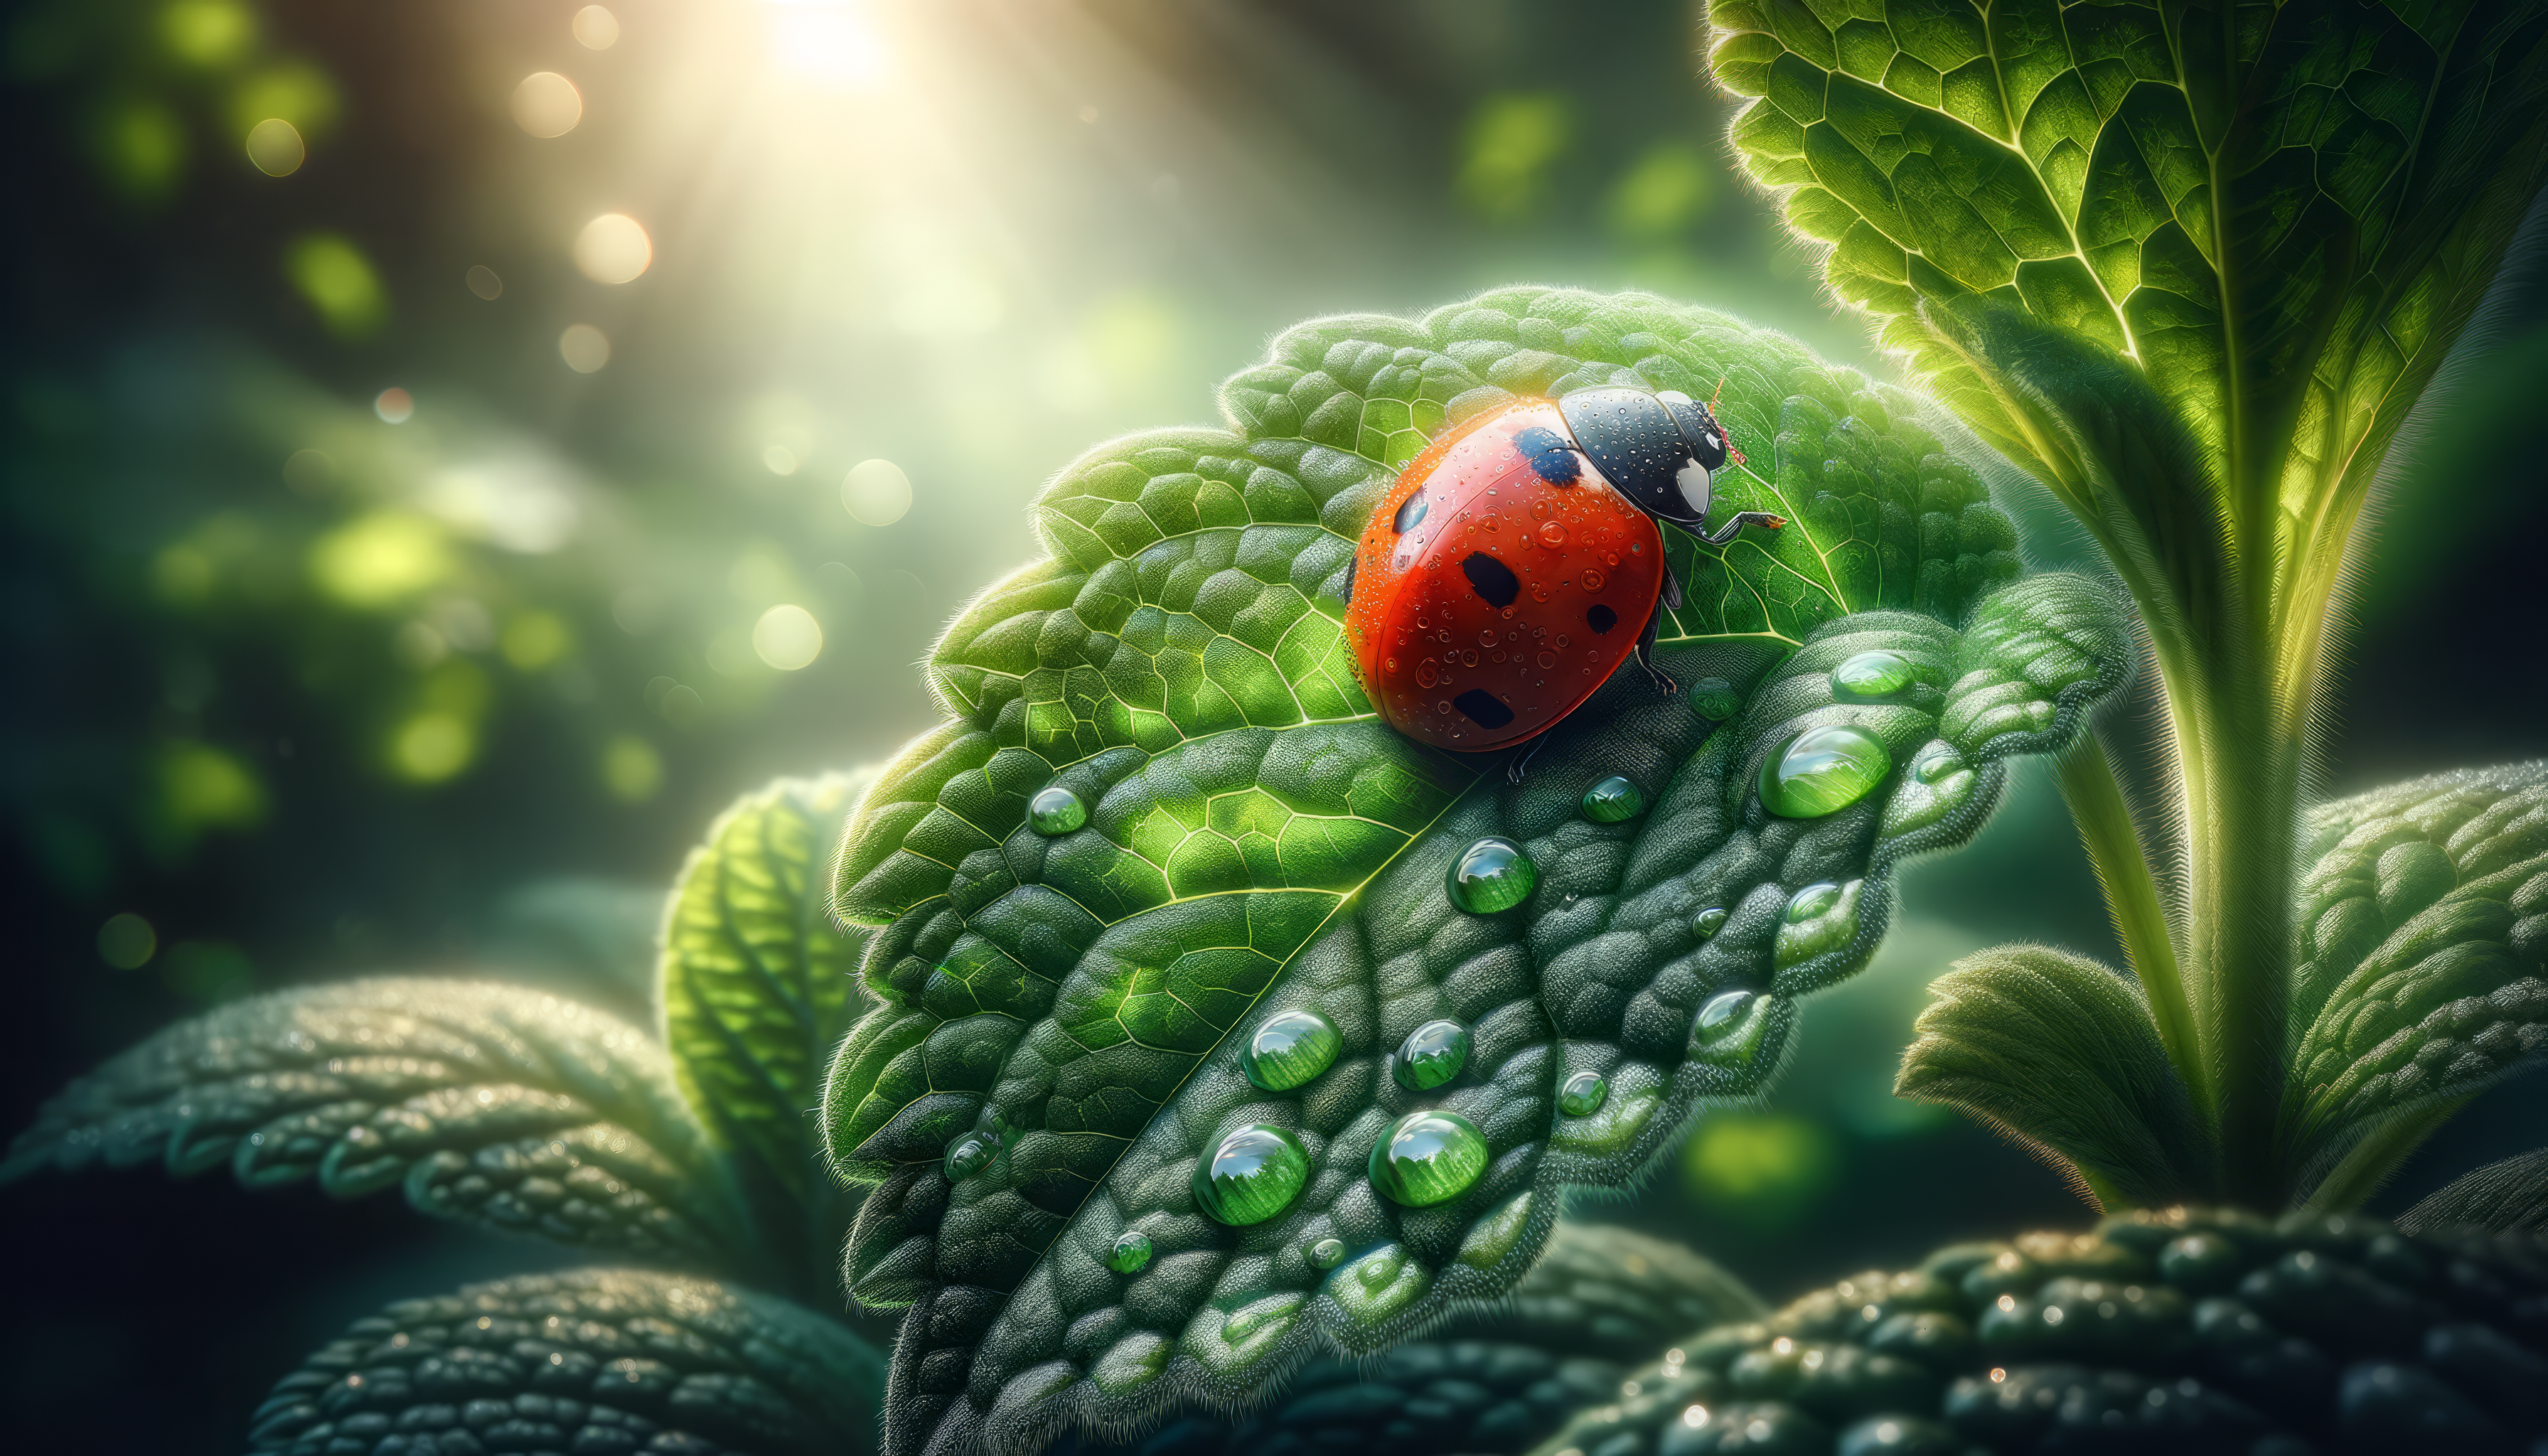 4,728 Lady Bug Wallpaper Images, Stock Photos, 3D objects, & Vectors